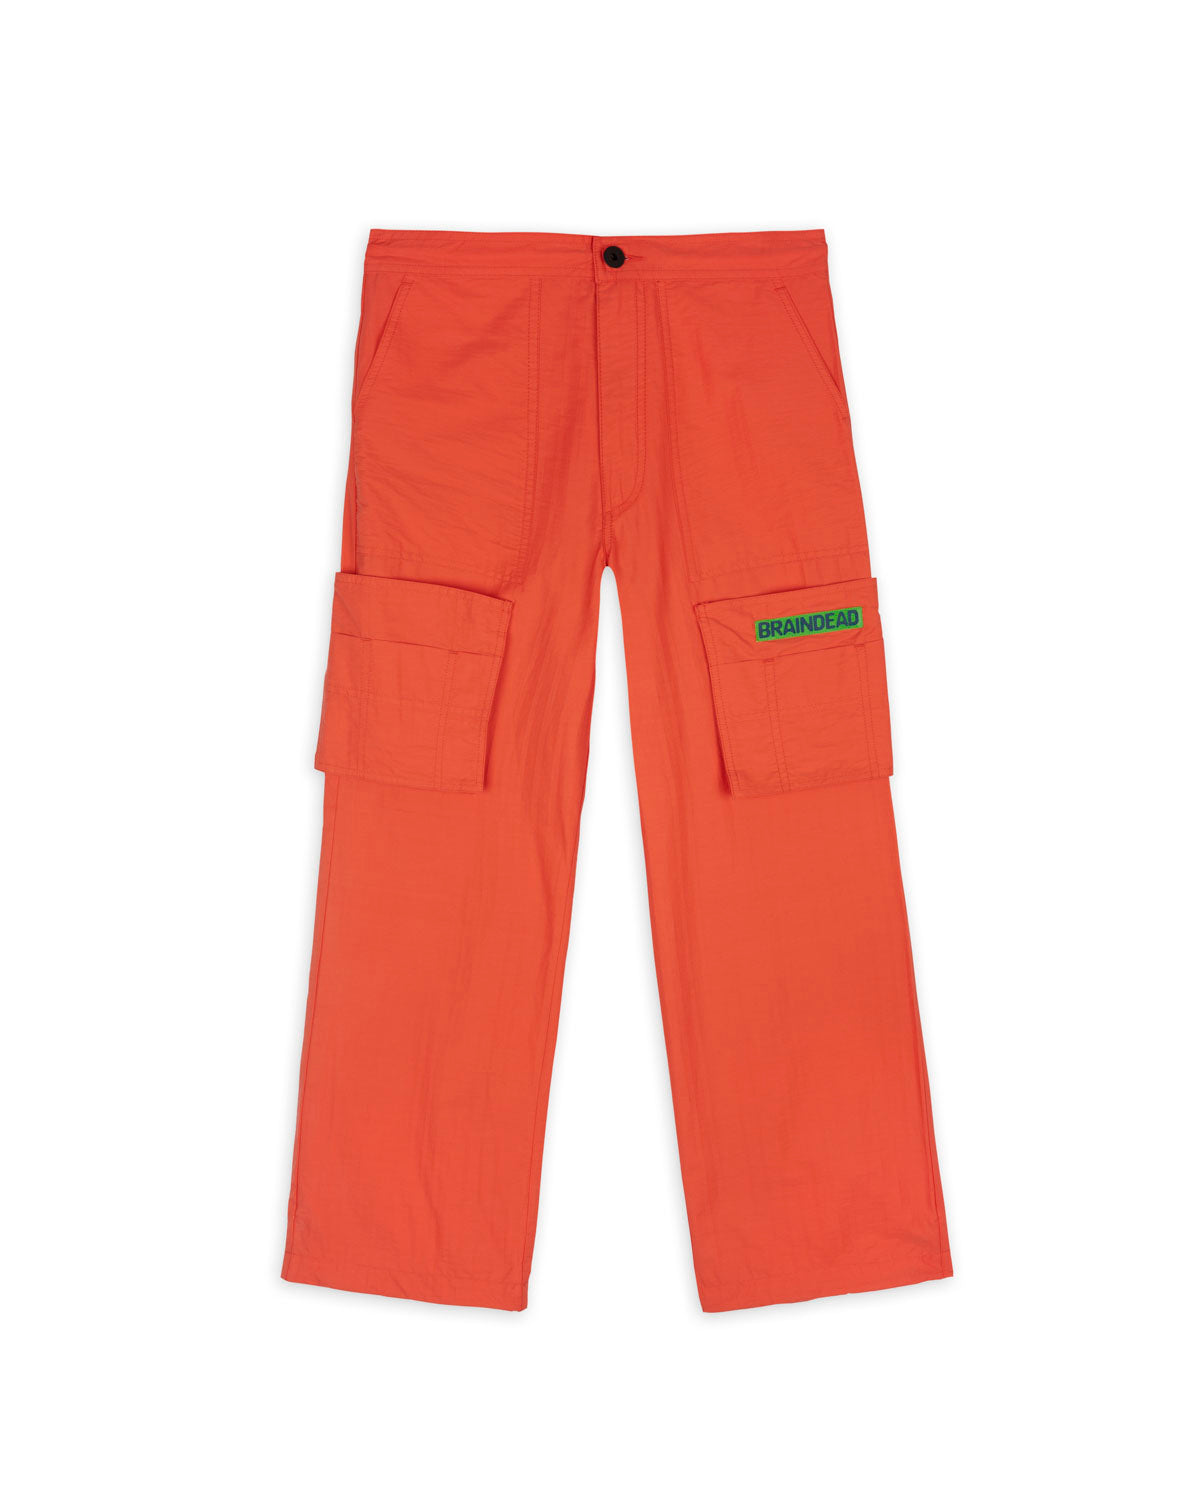 Knife Pleat Run Pant - Red 1